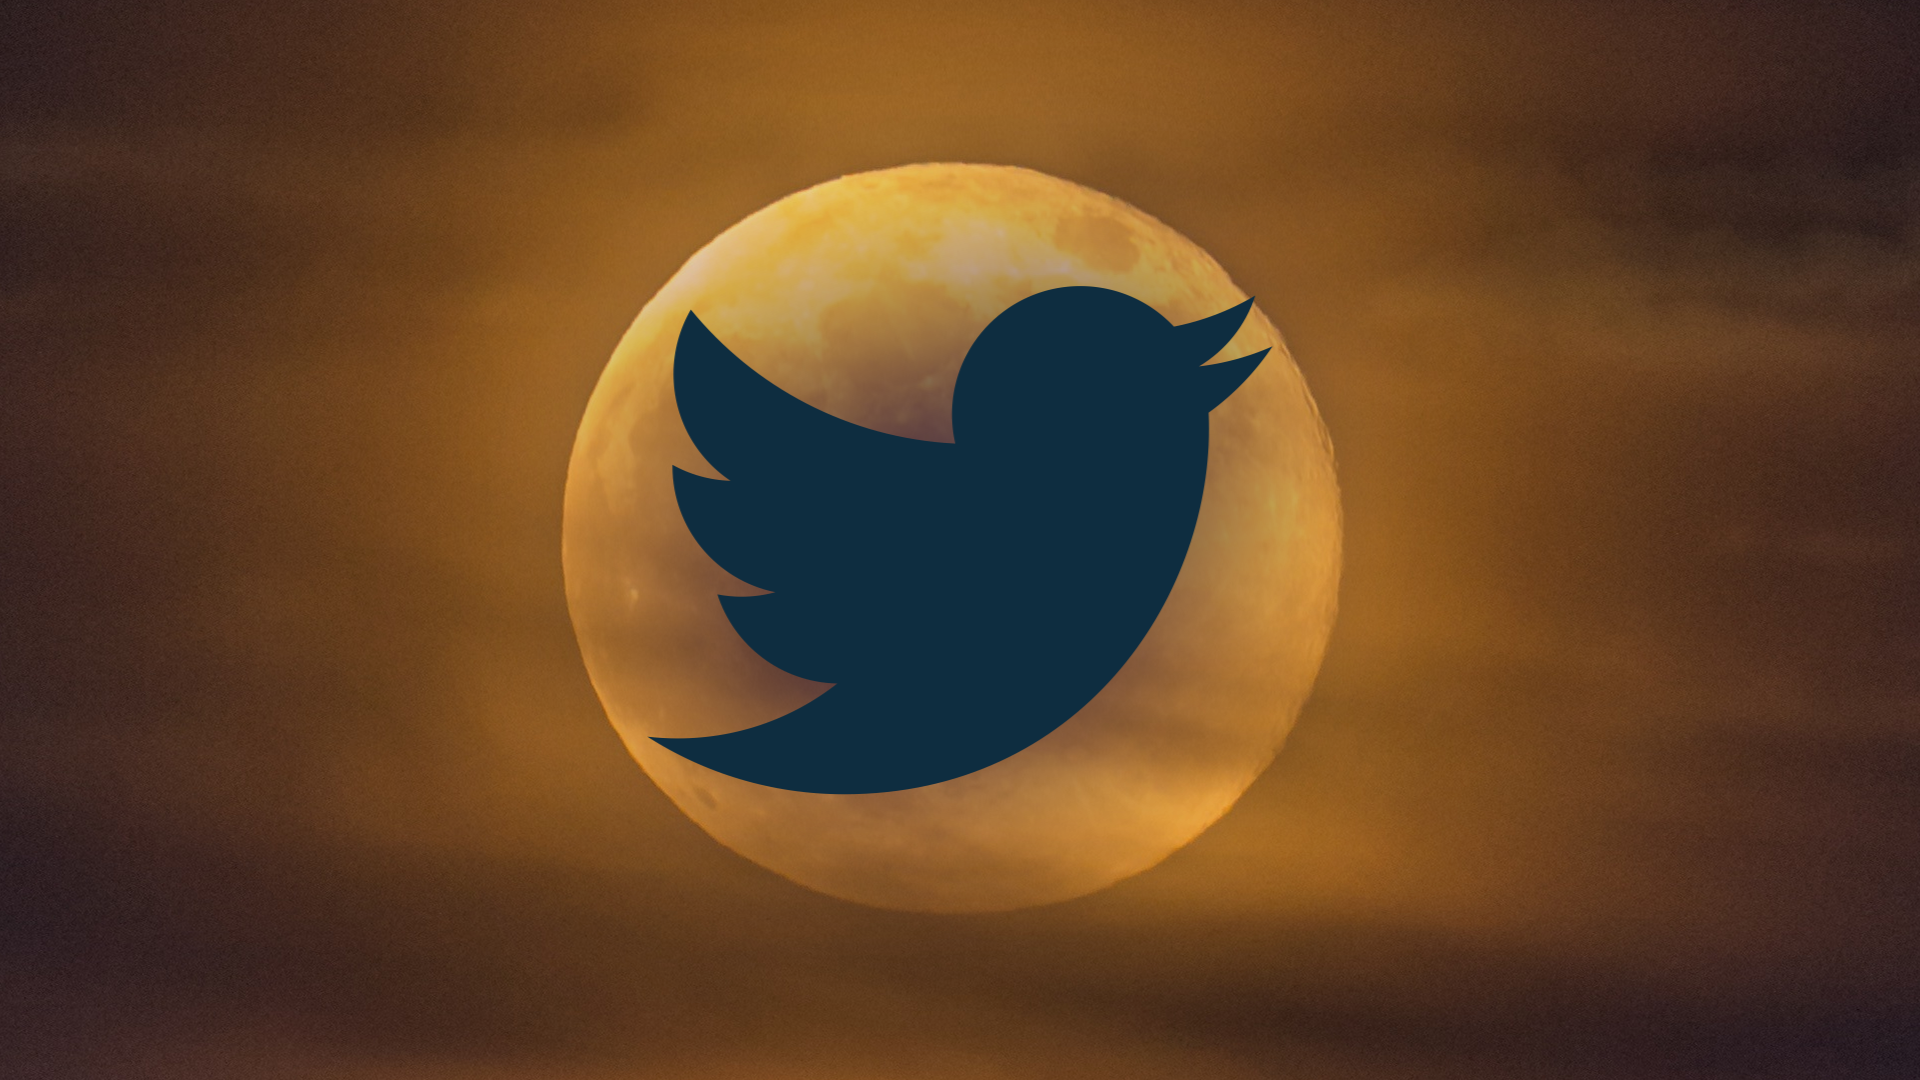 The old Twitter logo against a brown background simulating the sunset